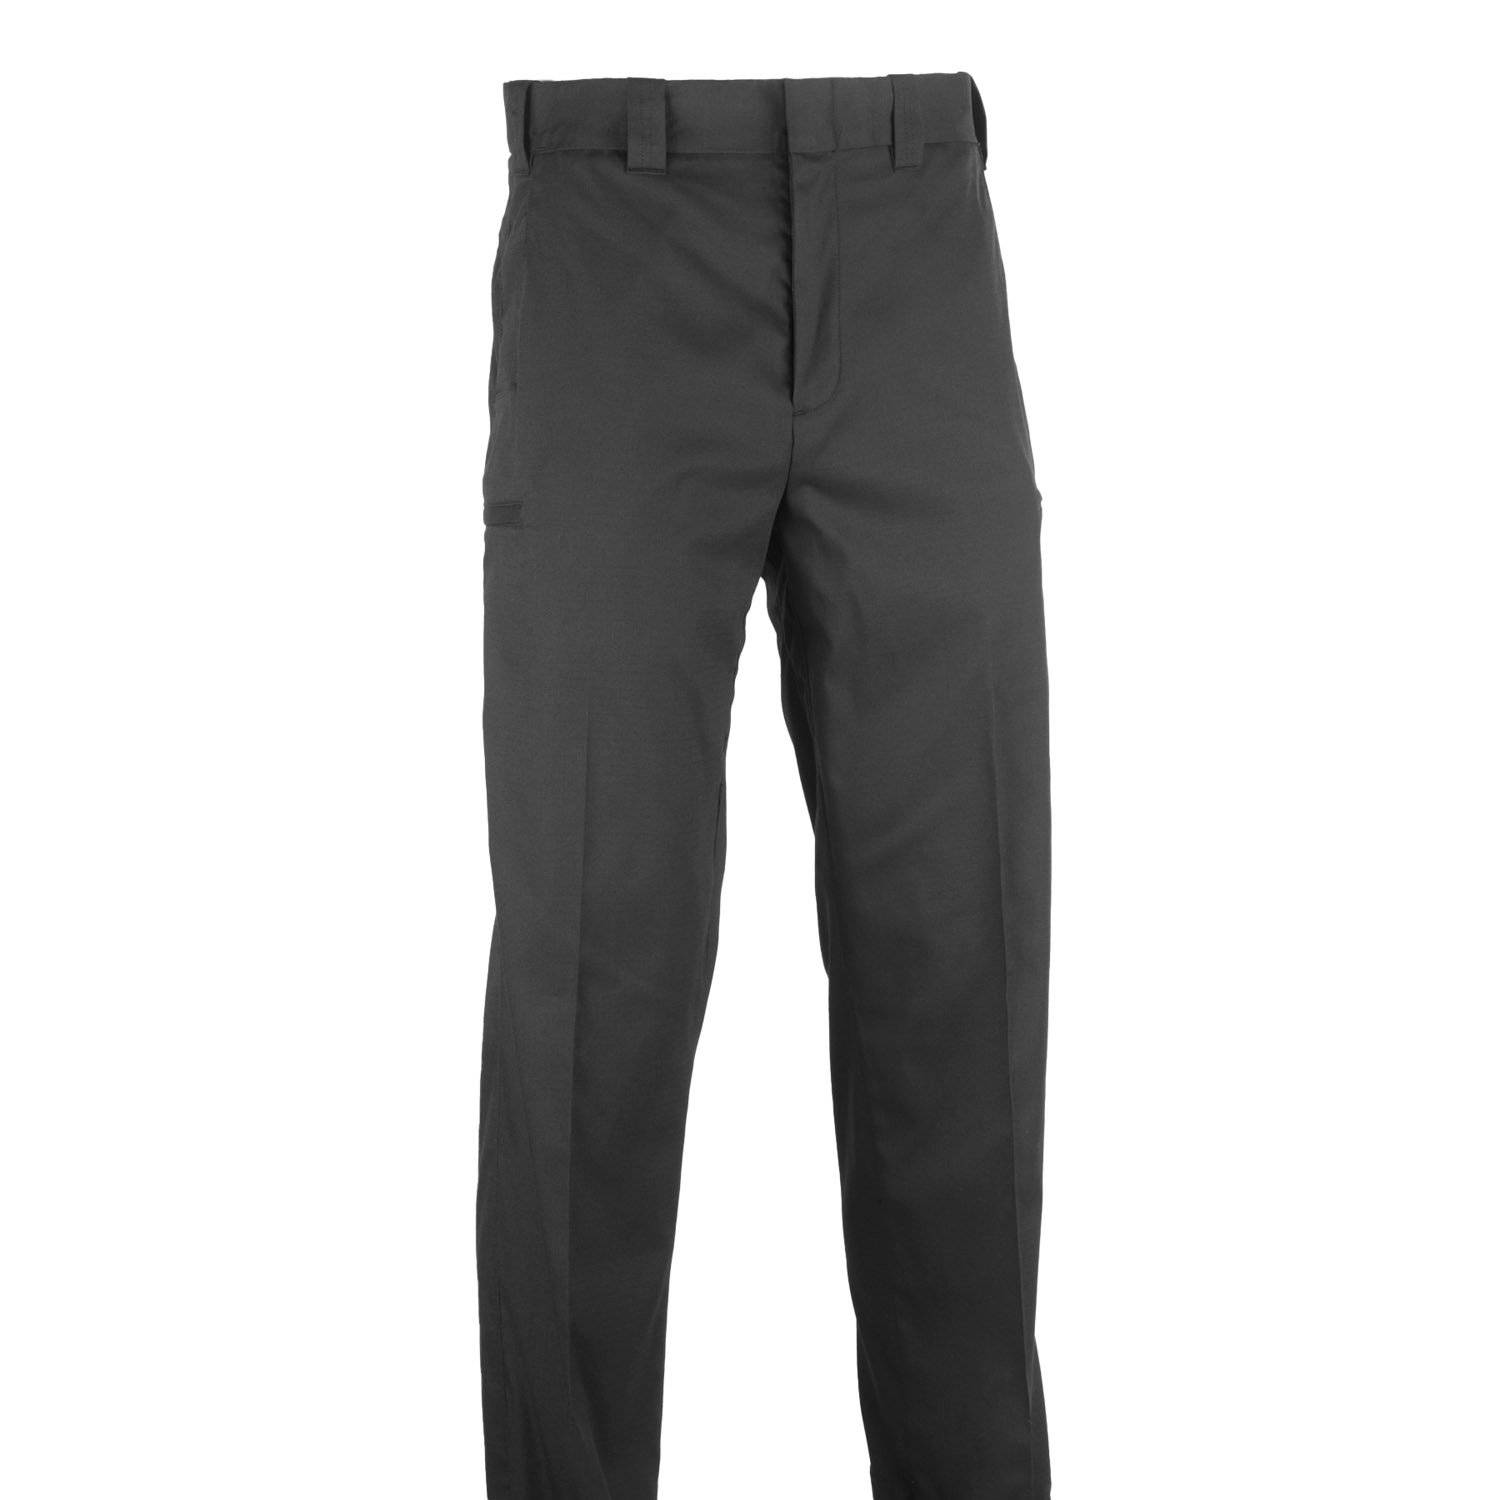 Flying Cross Florida Men's Polyester Trouser with 1inch Blac